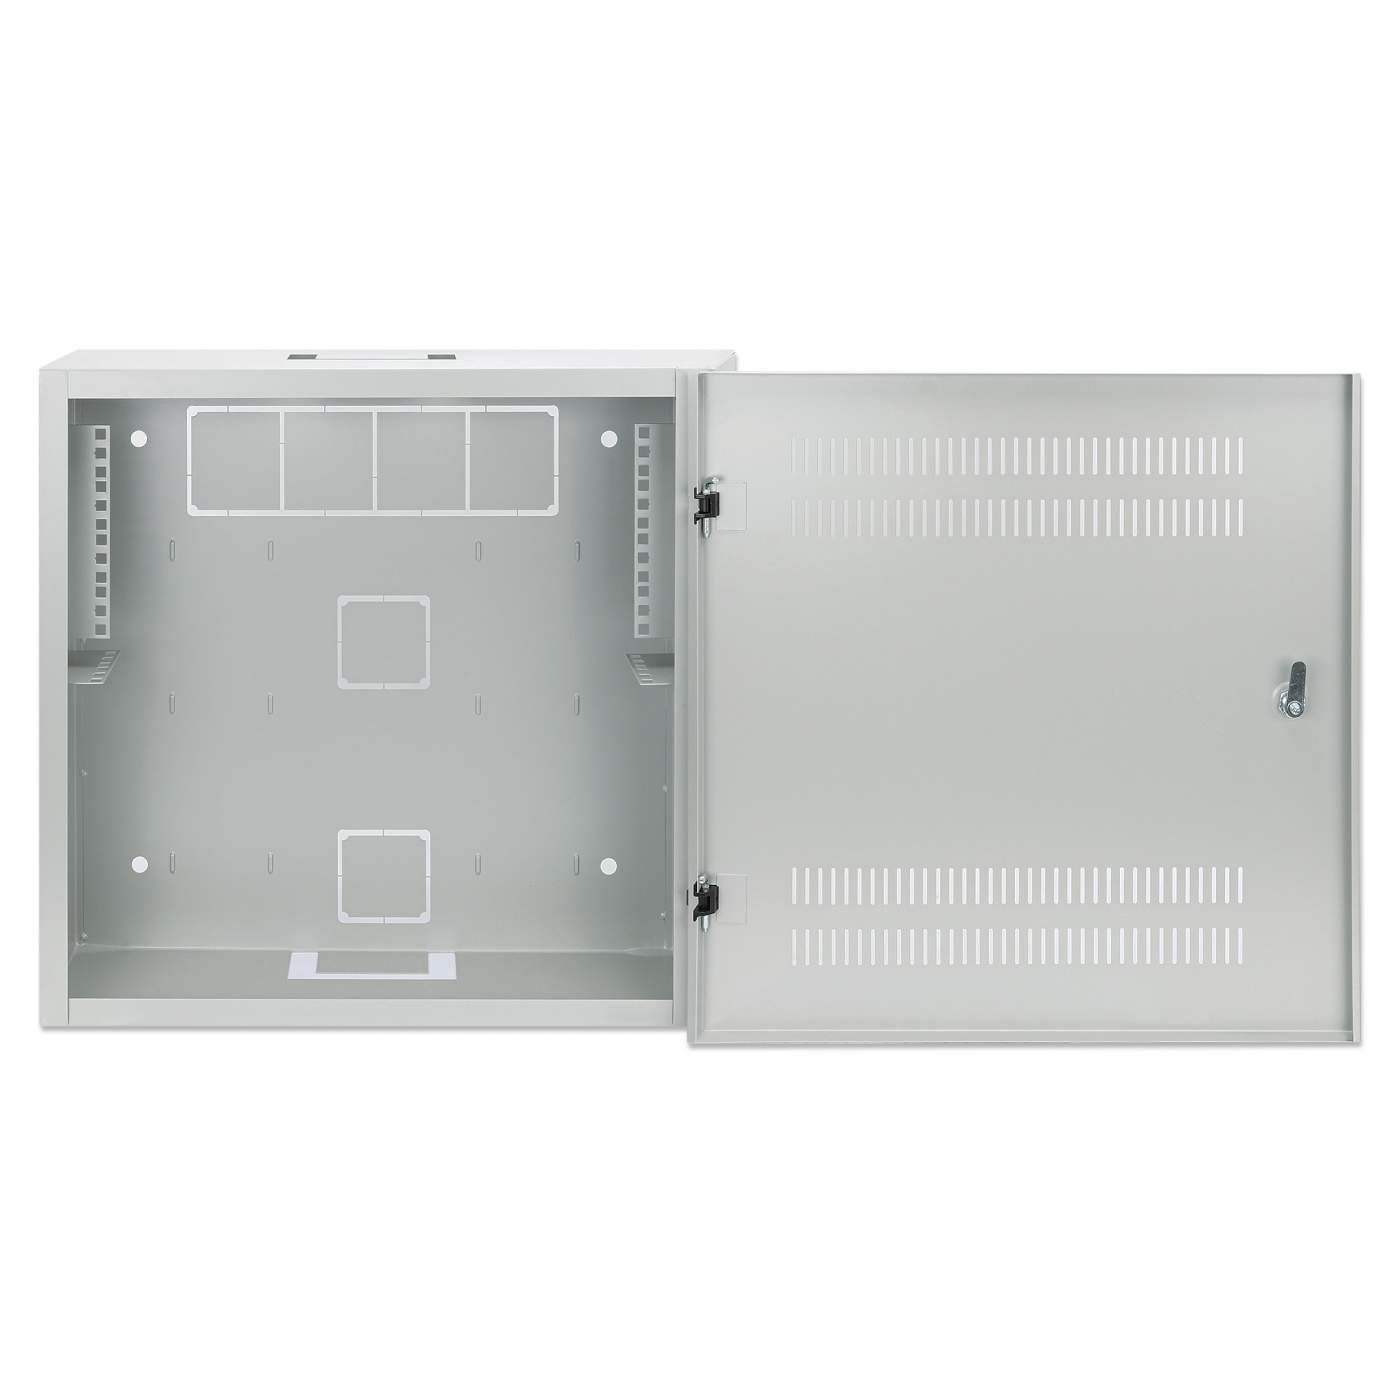 Low-Profile 19" Wall Mount Cabinet with 4U Horizontal and 2U Vertical Rails Image 5